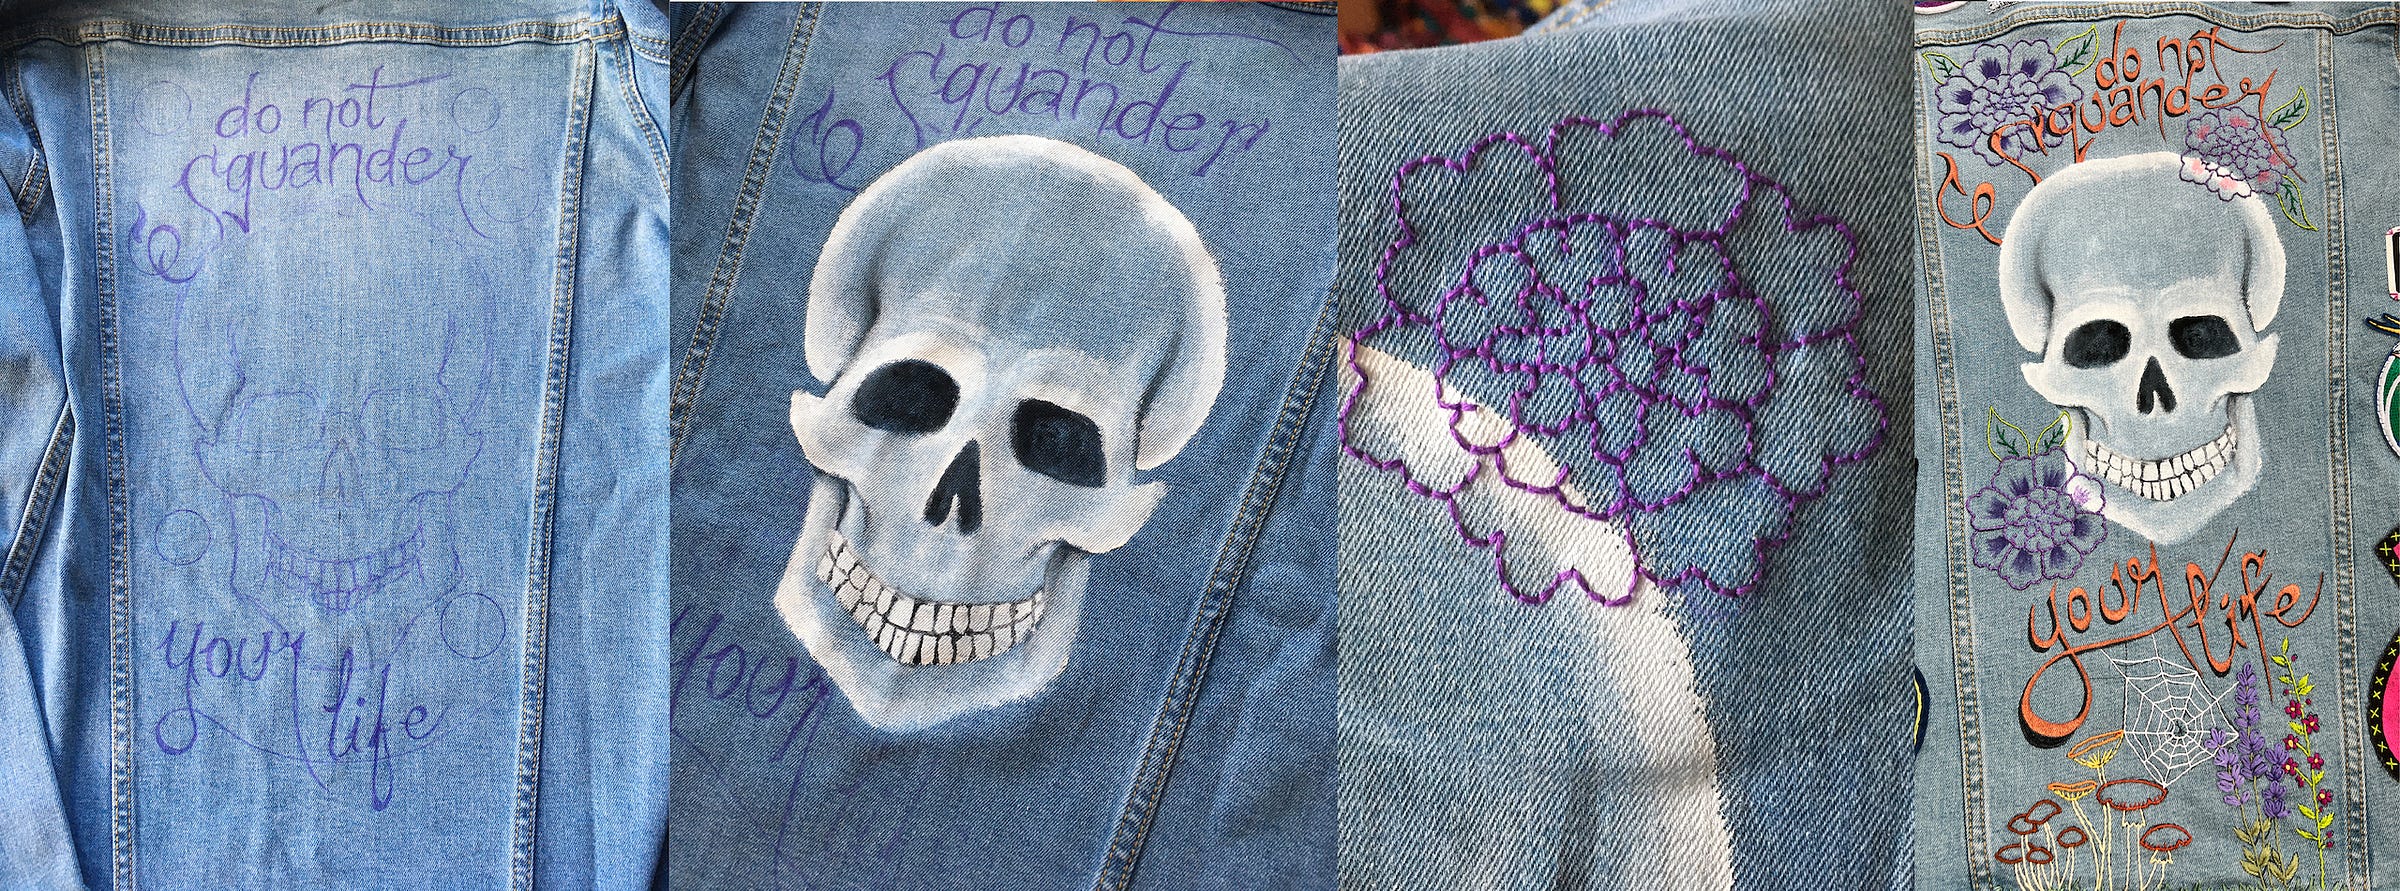 Photos of four images of the back of my denim vest. The first image on the far left is of the text, 'Do not Squander' written above a sketch of a skull, and 'your life' written below it in purple ink. The next image over is the finished acrylic painted skull, with the text still in purple. The third image is a close up shot of an embroidered purple peony. The final image on the far right is the whole back image in completion. The skull is in the centre and has three embroidered peonies around it. The text, "Do not squander your life," is painted in with bronze acrylic paint and highlighted with black to make it stand out. Along the bottom of the design is an embroidered scene of mushrooms, lavender, and little magenta flowers with a spiderweb connecting it all and to the bottom of the text. 